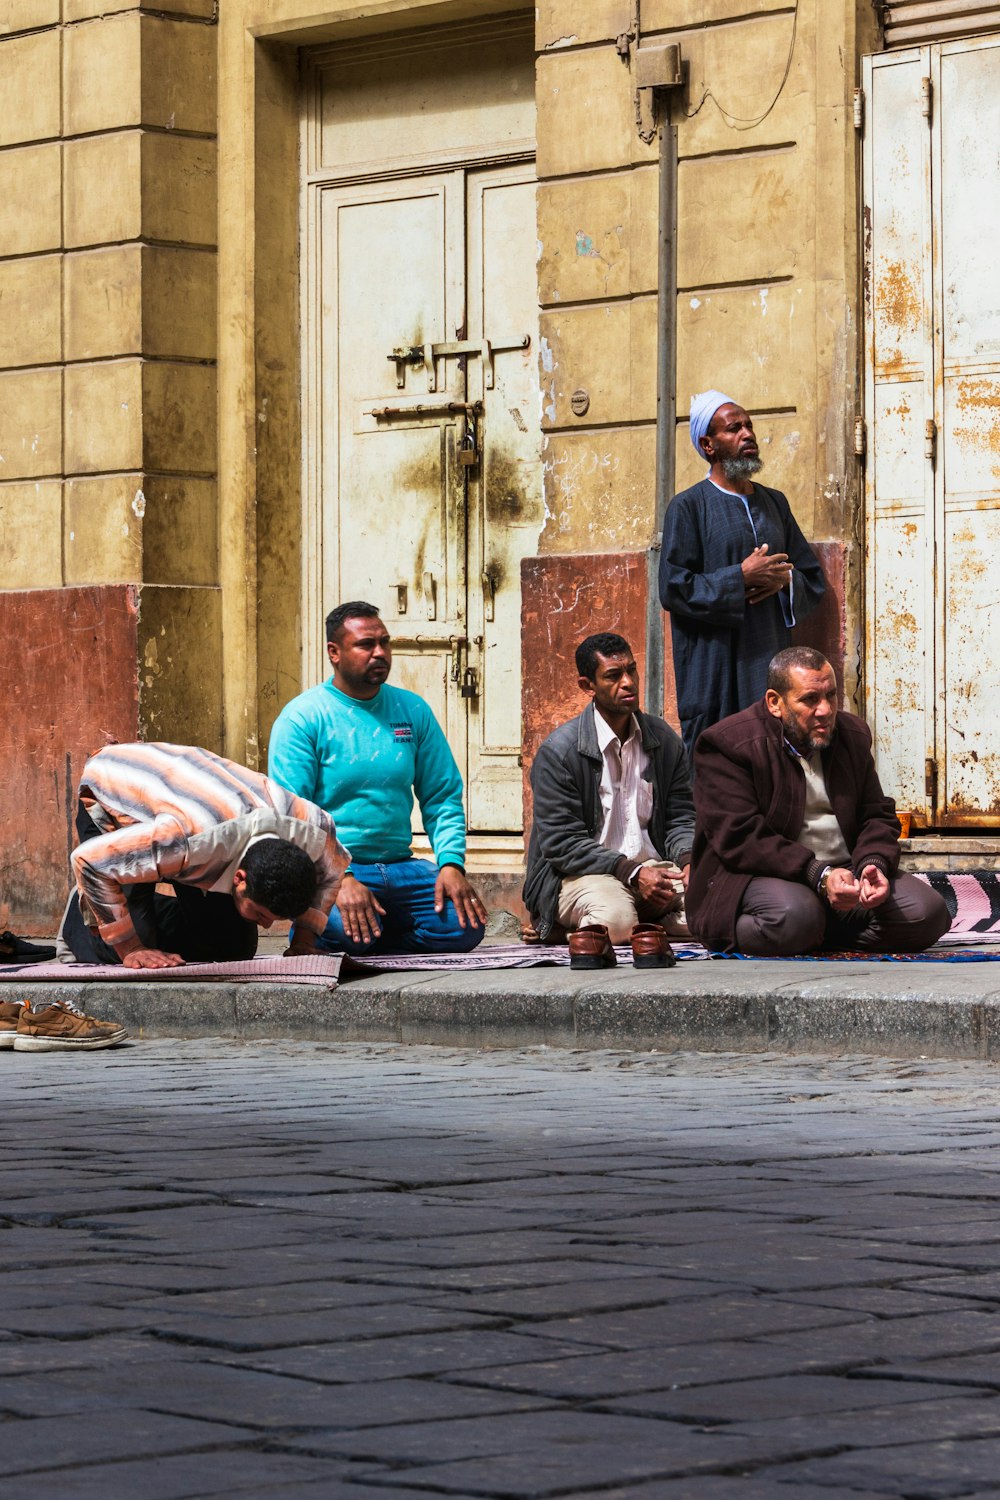 a group of men sitting on the ground in front of a building